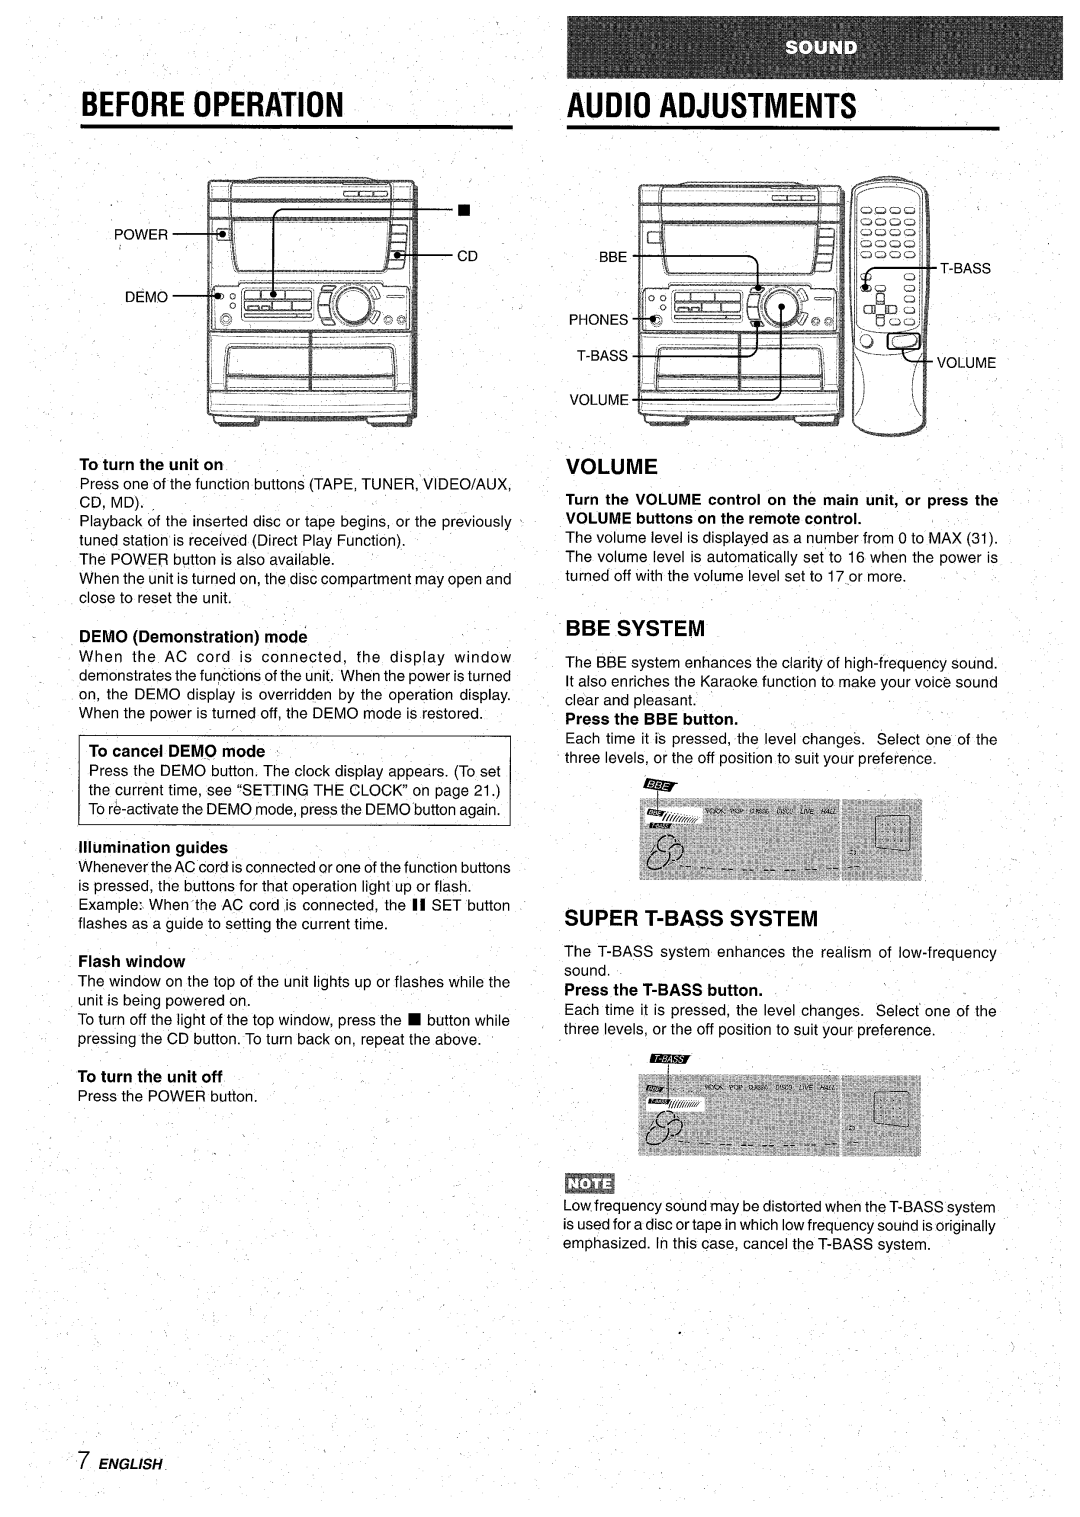 Aiwa CX-NA71 manual Before Operation, Audio Adjustments, Volume, Bbe System, Super T-Bass System, To turn the unit on 